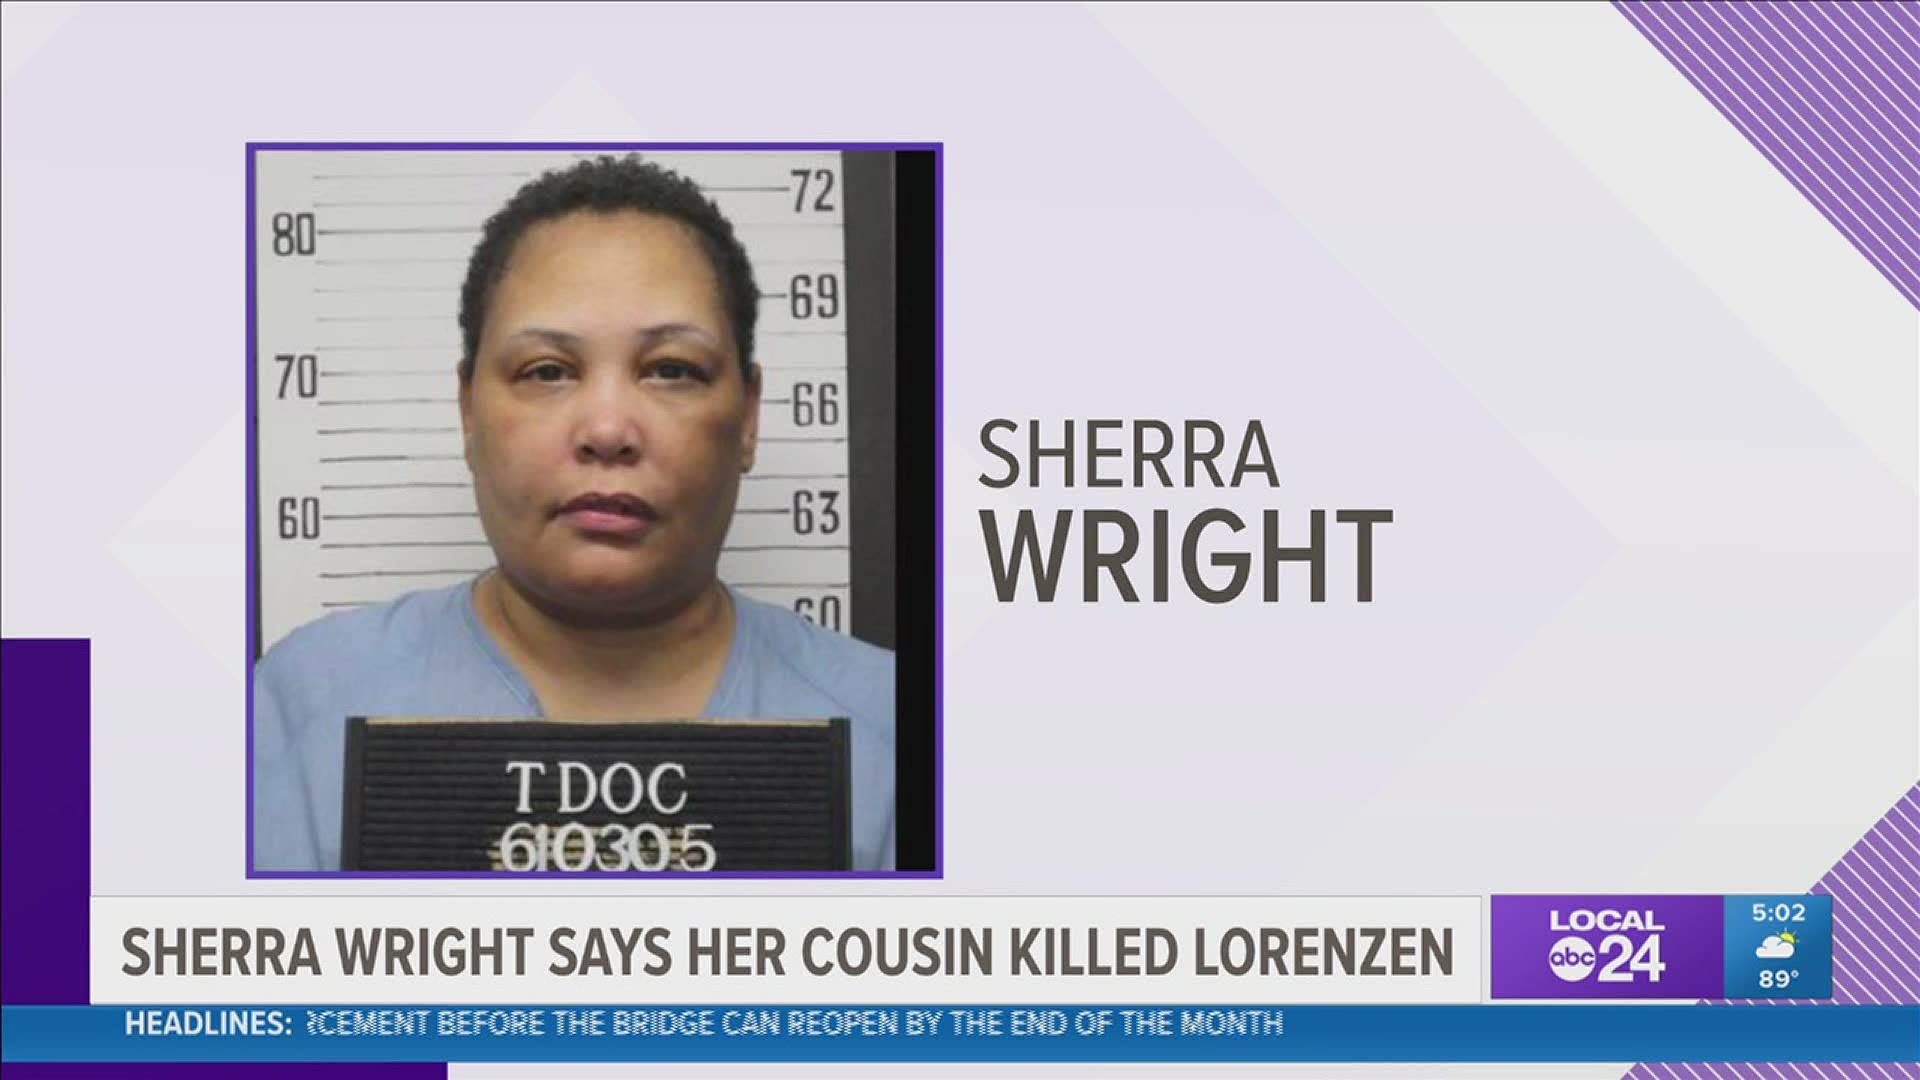 Sherra Wright made the claims during a phone interview conducted with ESPN for their E:60 special on Lorenzen Wright's death.